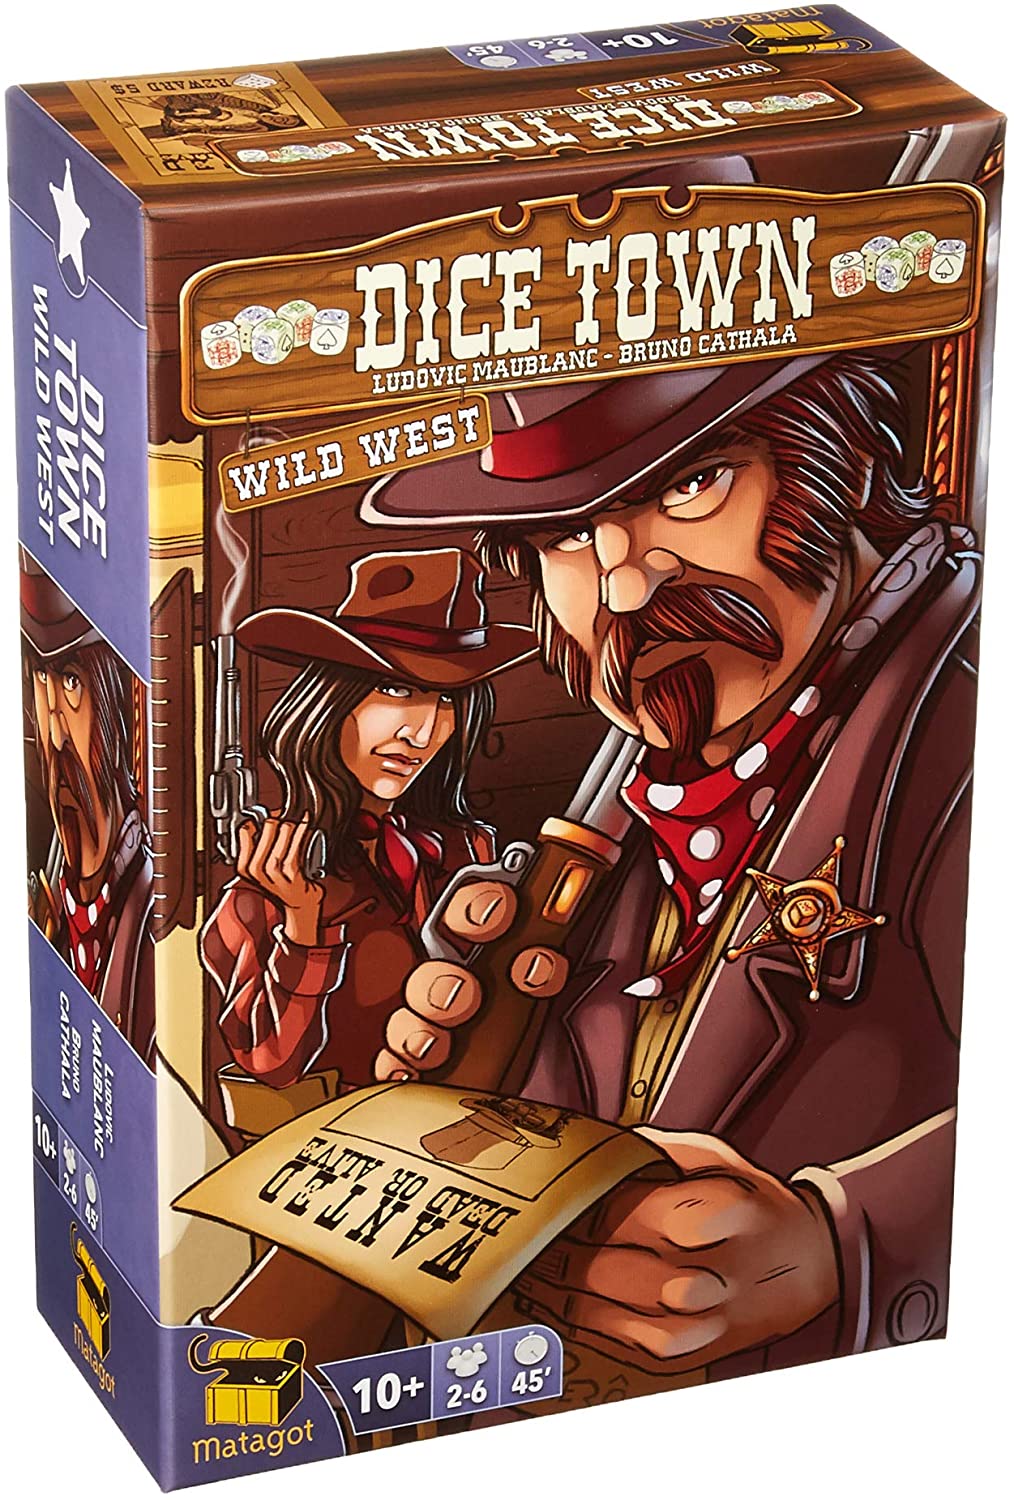 Dice Town: Wild West Expansion